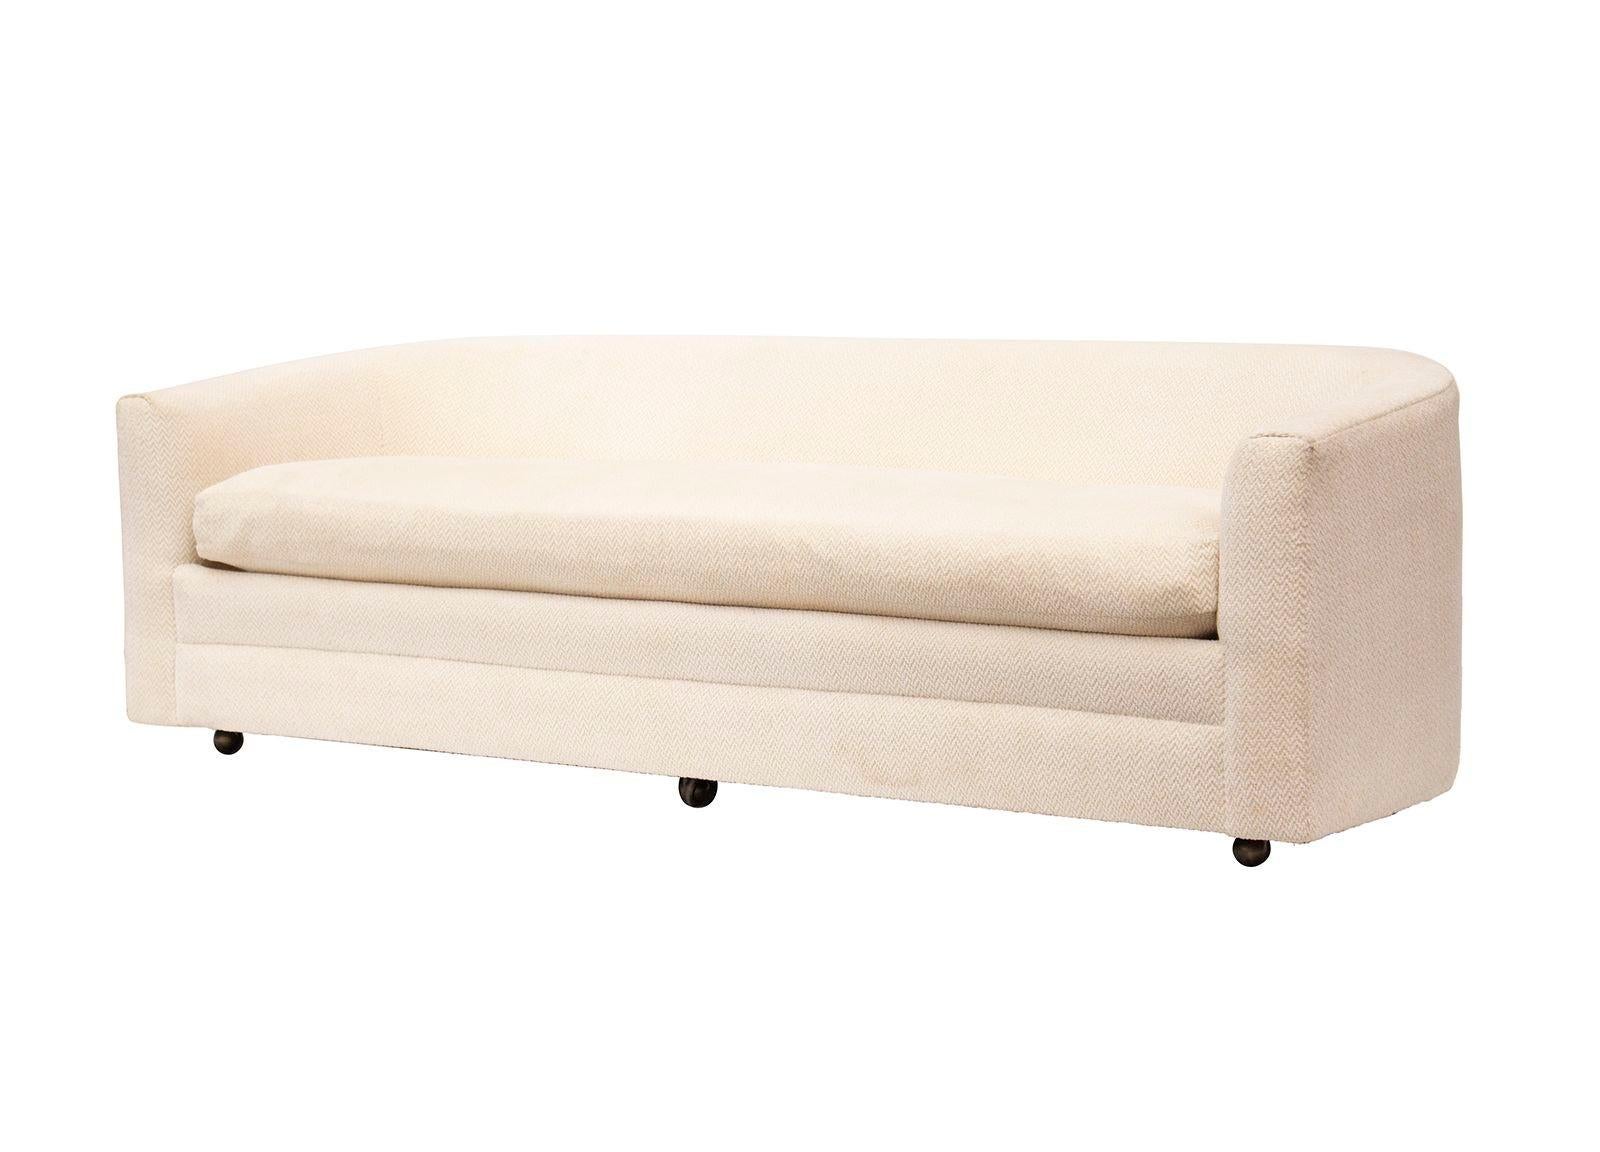 Mid-Century Modern Custom Sofa on Casters in Cream Boucle #1 For Sale